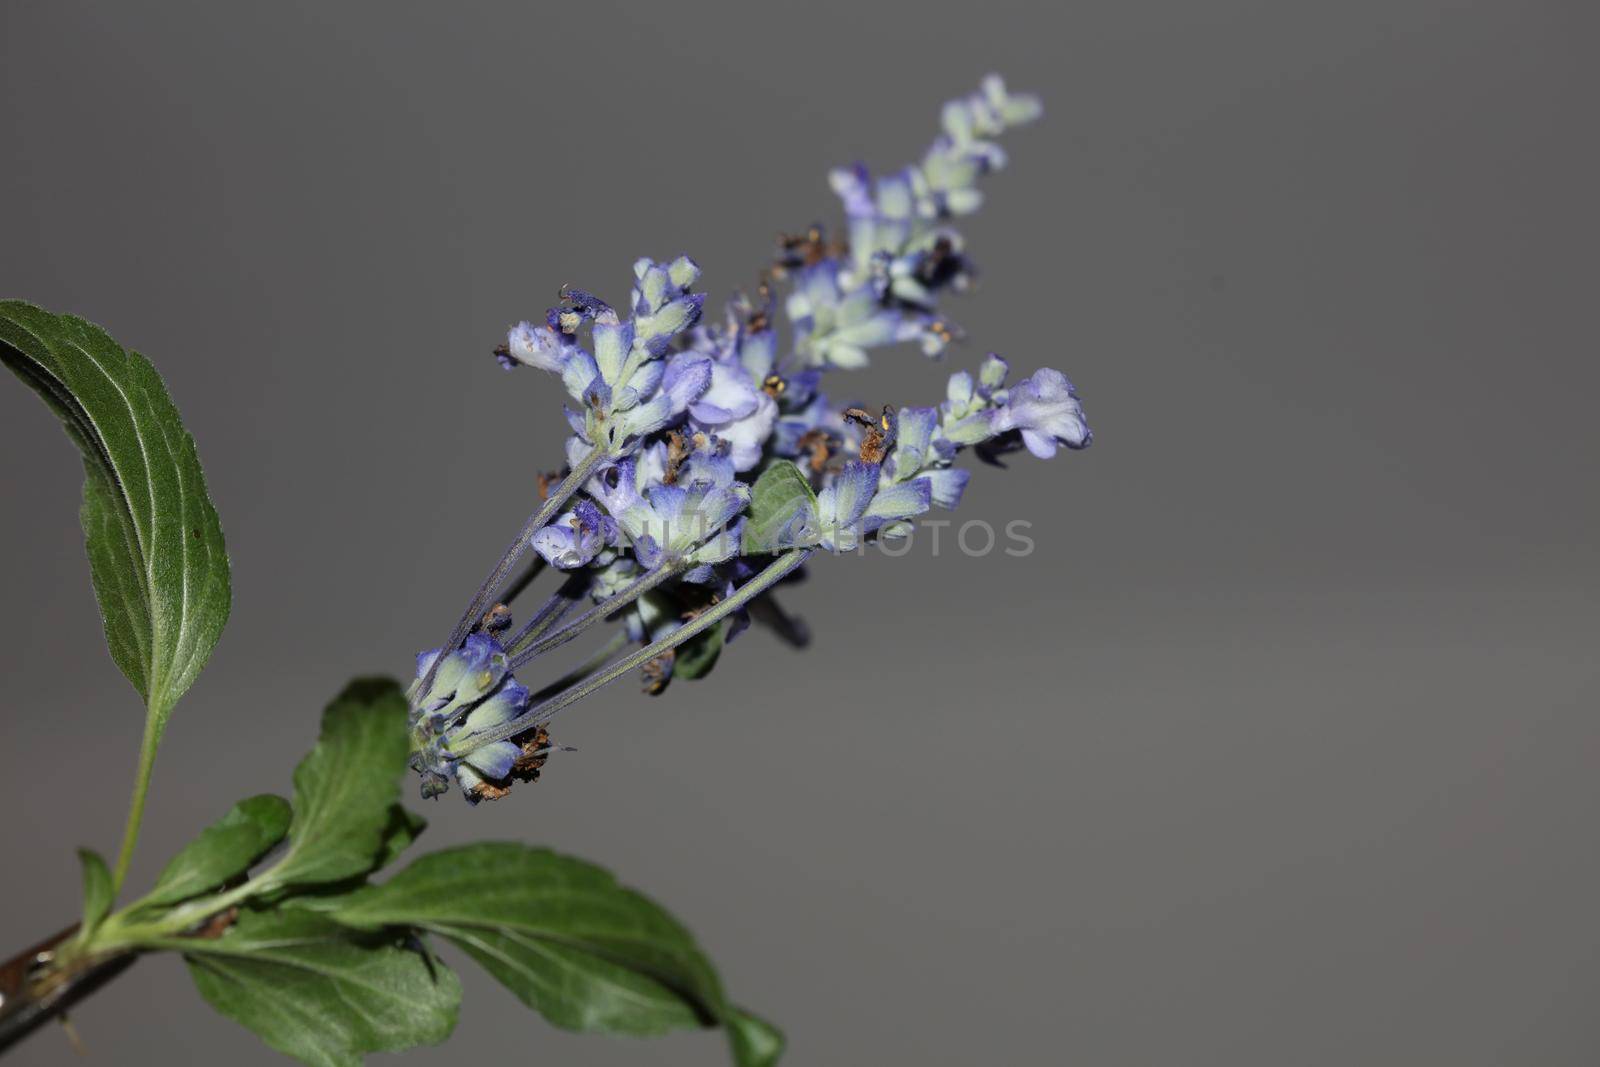 Flower blossom salvia divinorum family lamiaceae close up botanical background high quality big size prints home decor agricultural psychoactive flowers